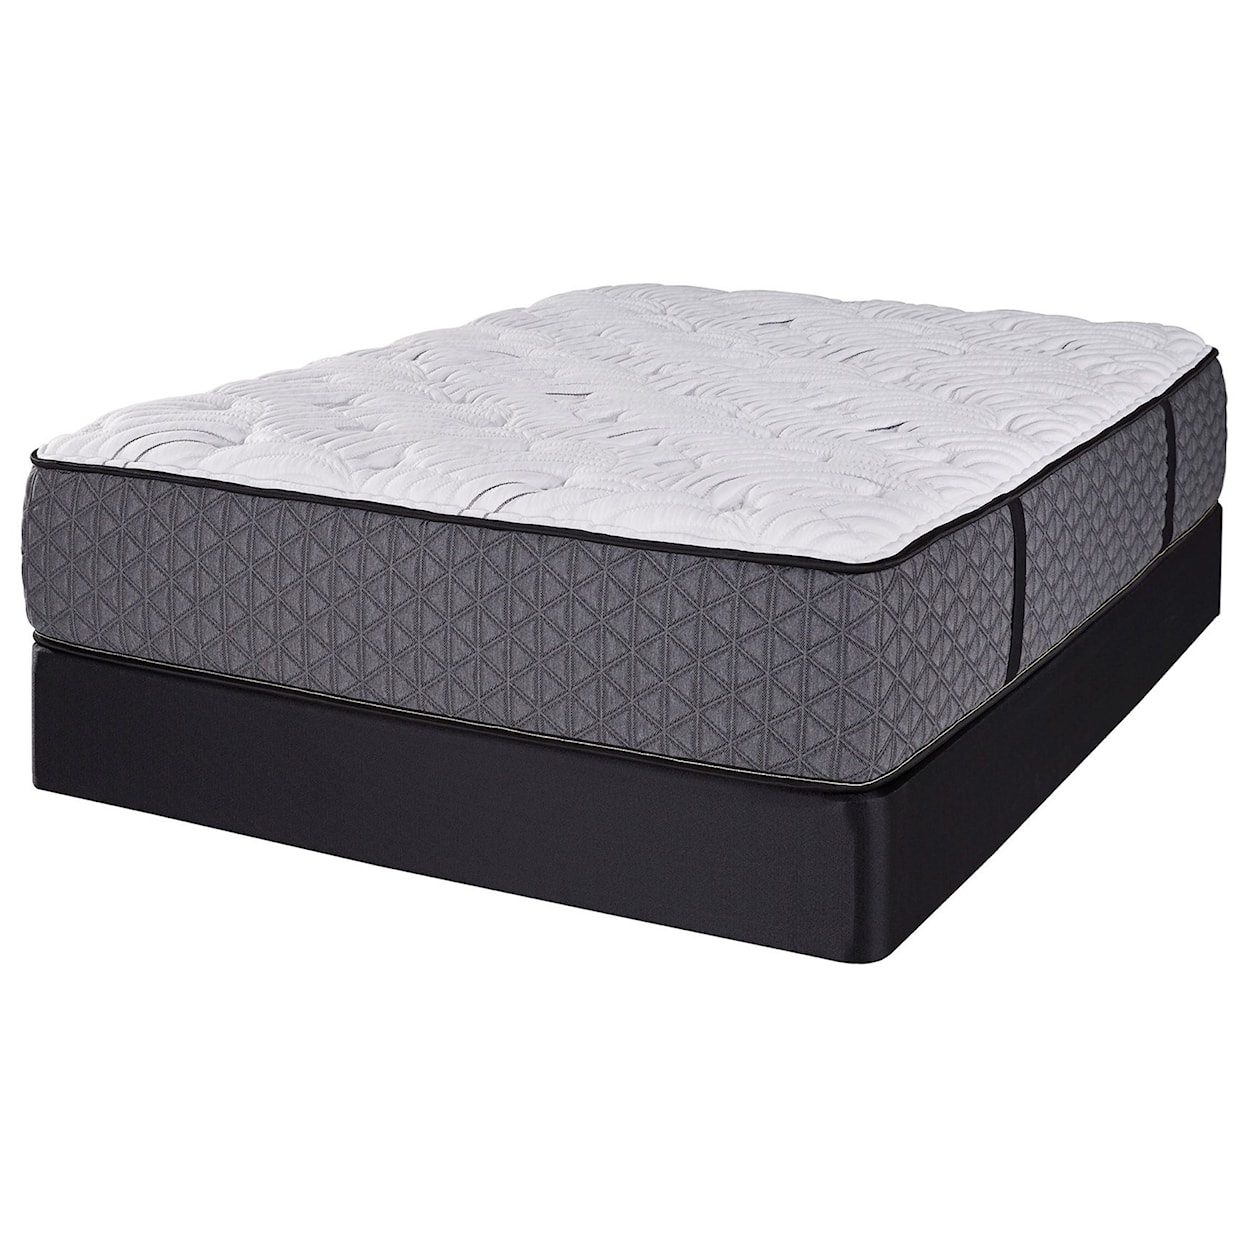 Restonic Stratford Firm 2 Sided King Firm 2-Sided Mattress Set